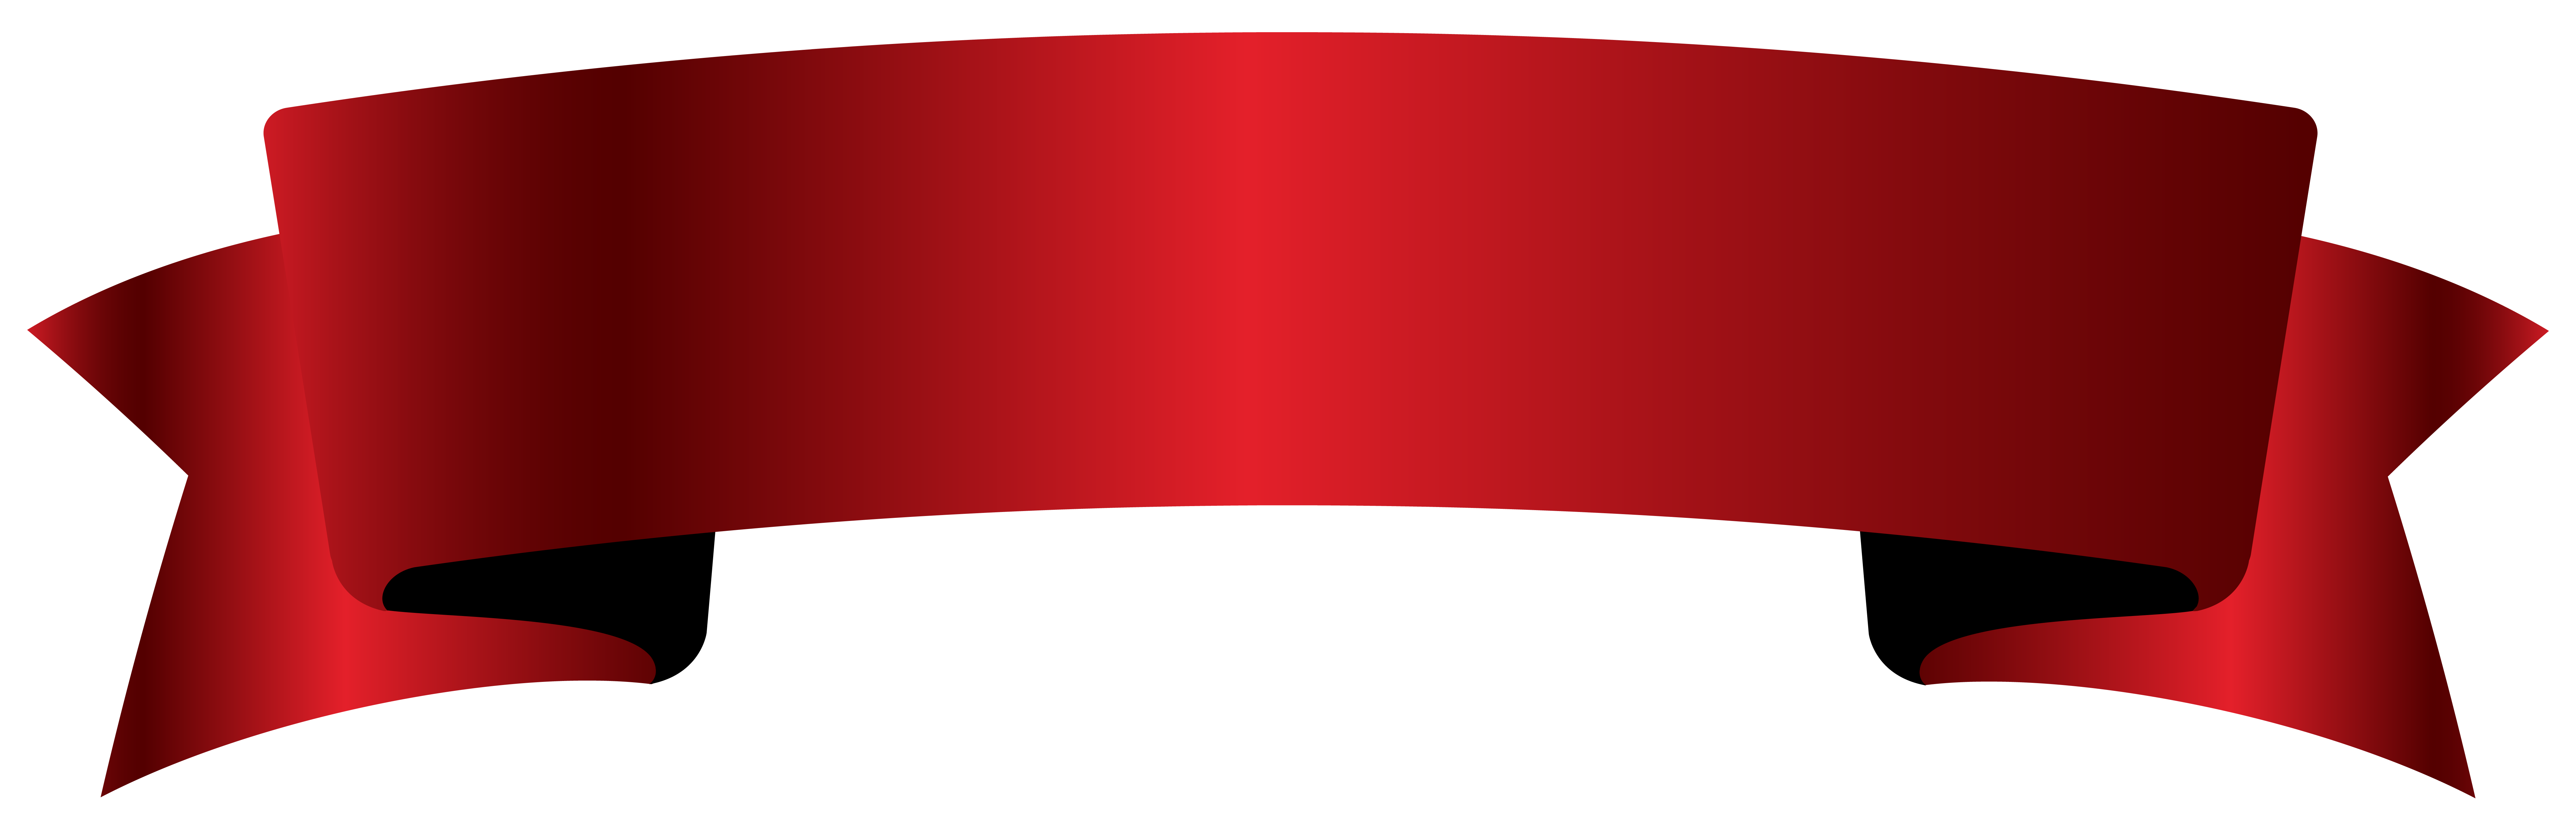 Makeup clipart banner. Red png picture word